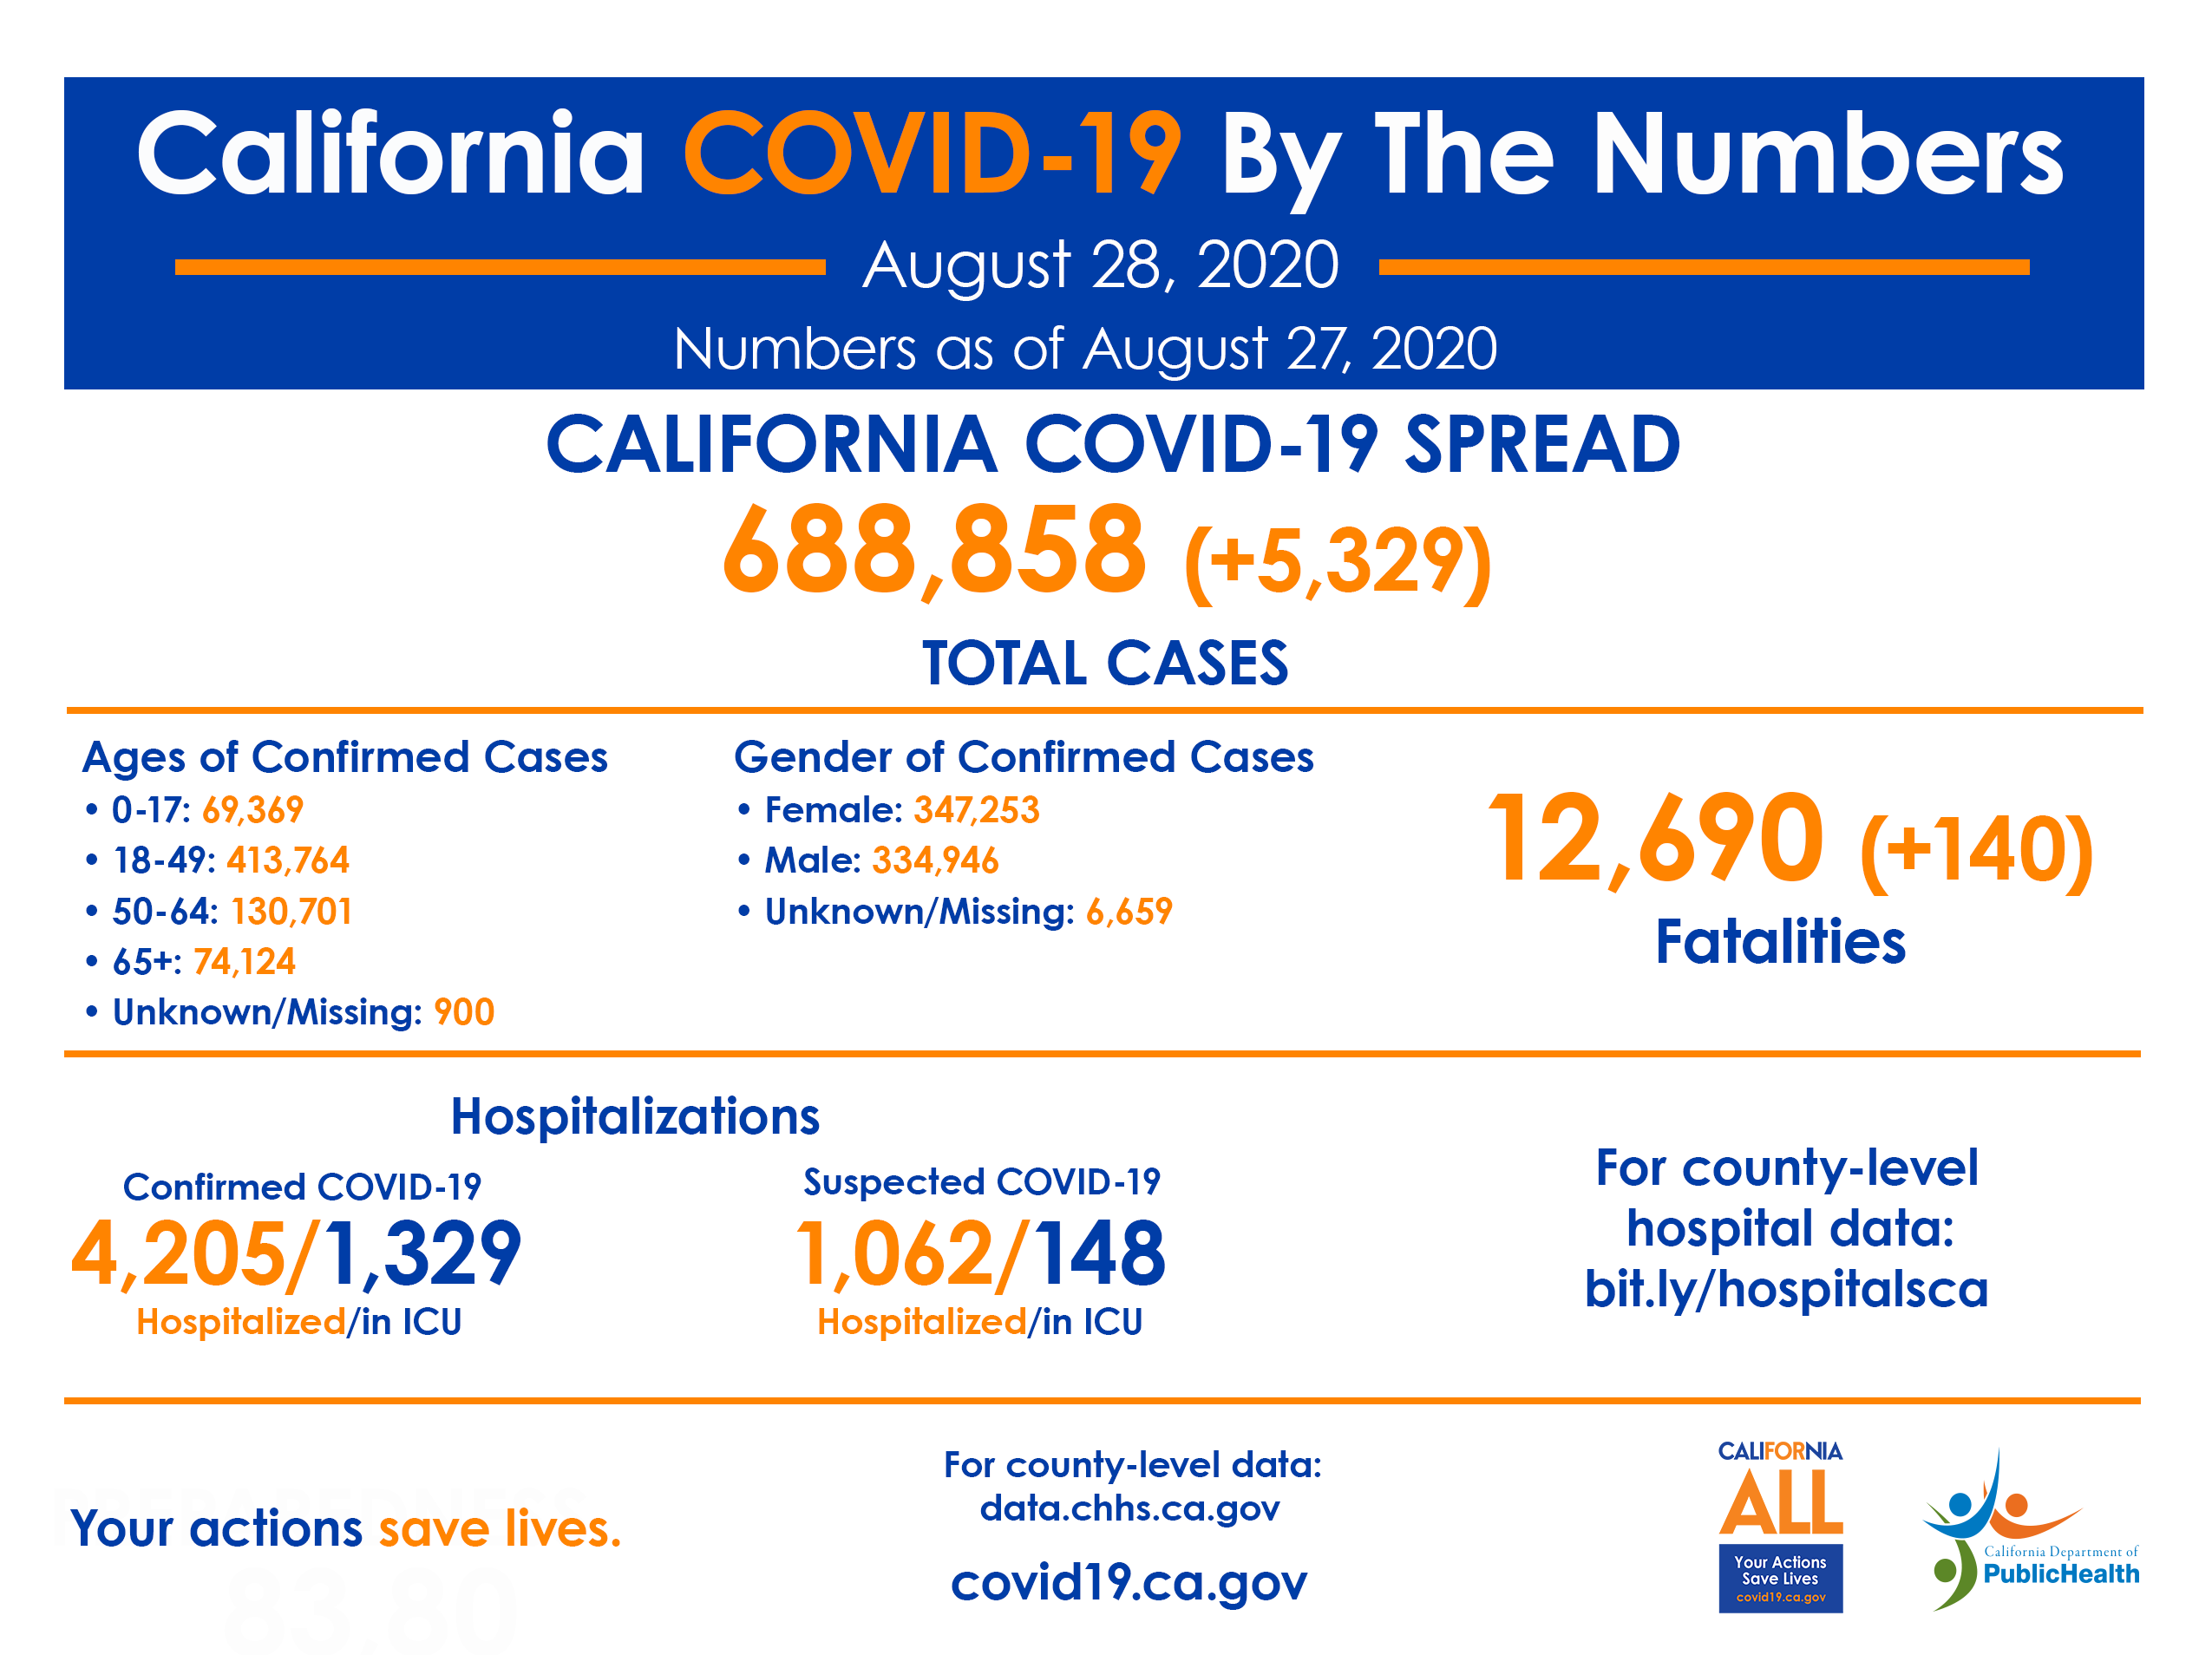 CA COVID-19 By The Numbers Aug 28